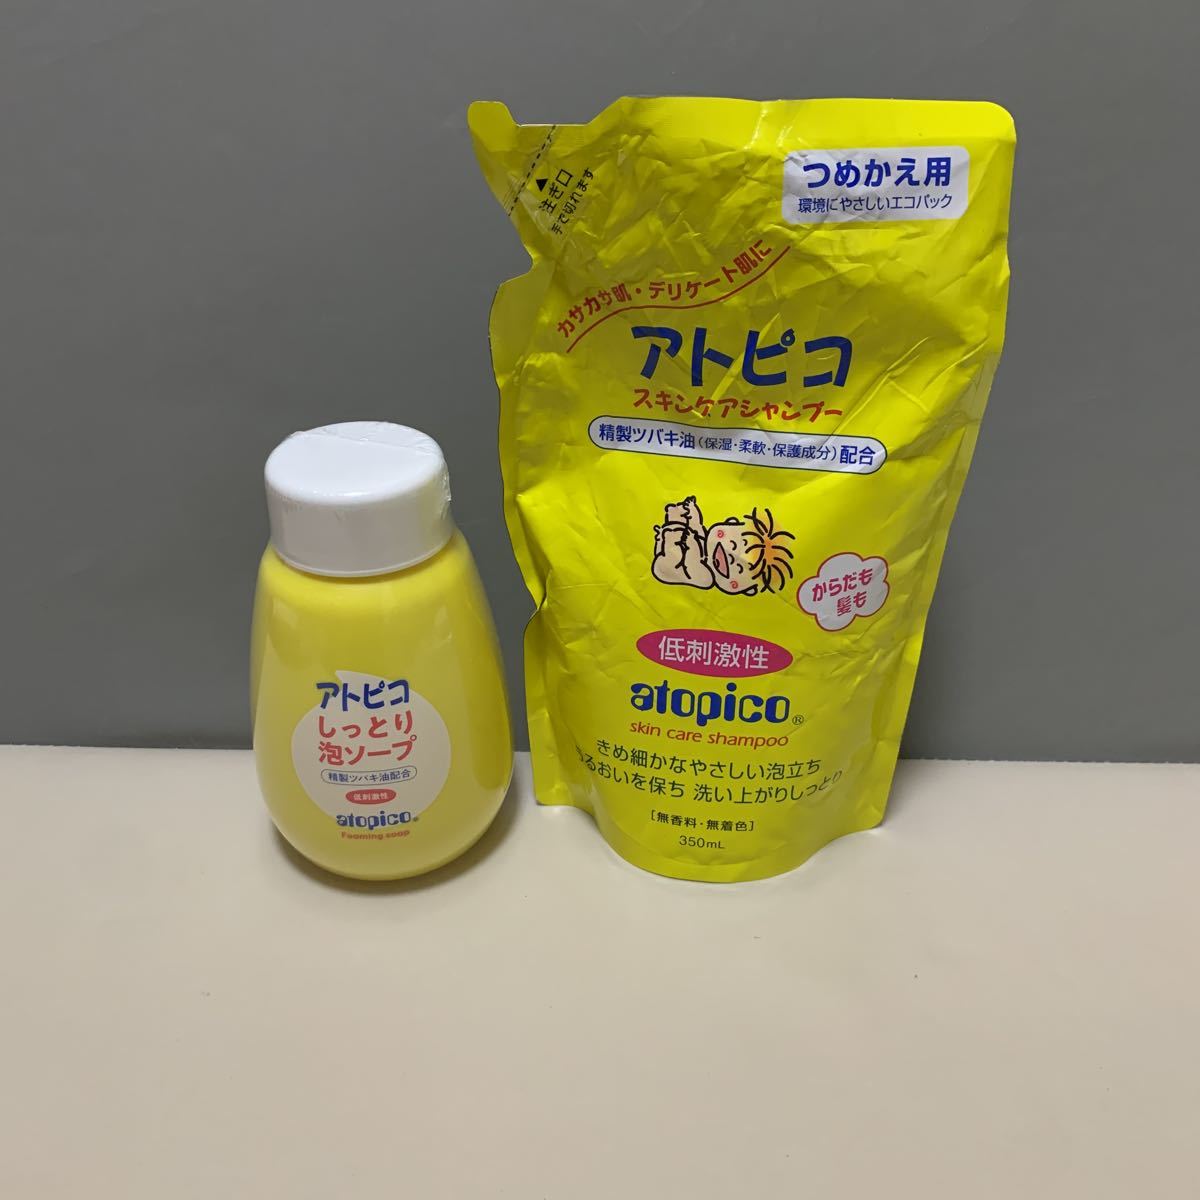 Y8912 marks pico skin care shampoo .... for 350ml moist foam soap attaching .. for 300ml 2 piece set 